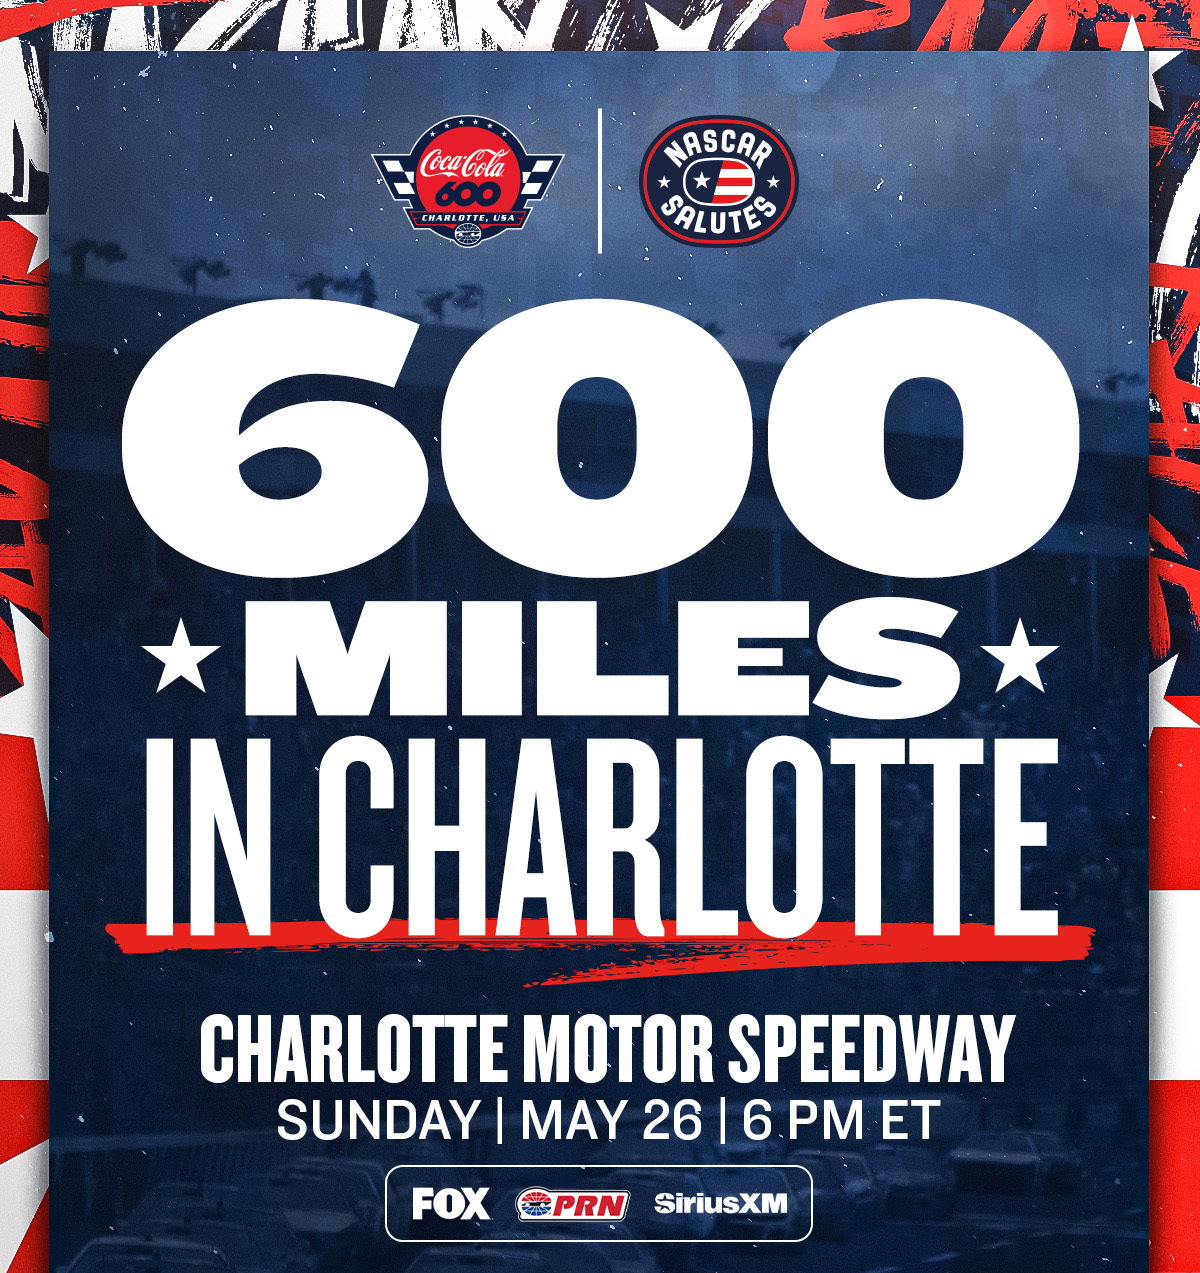 NASCAR Don't miss the CocaCola 600 in Charlotte Milled